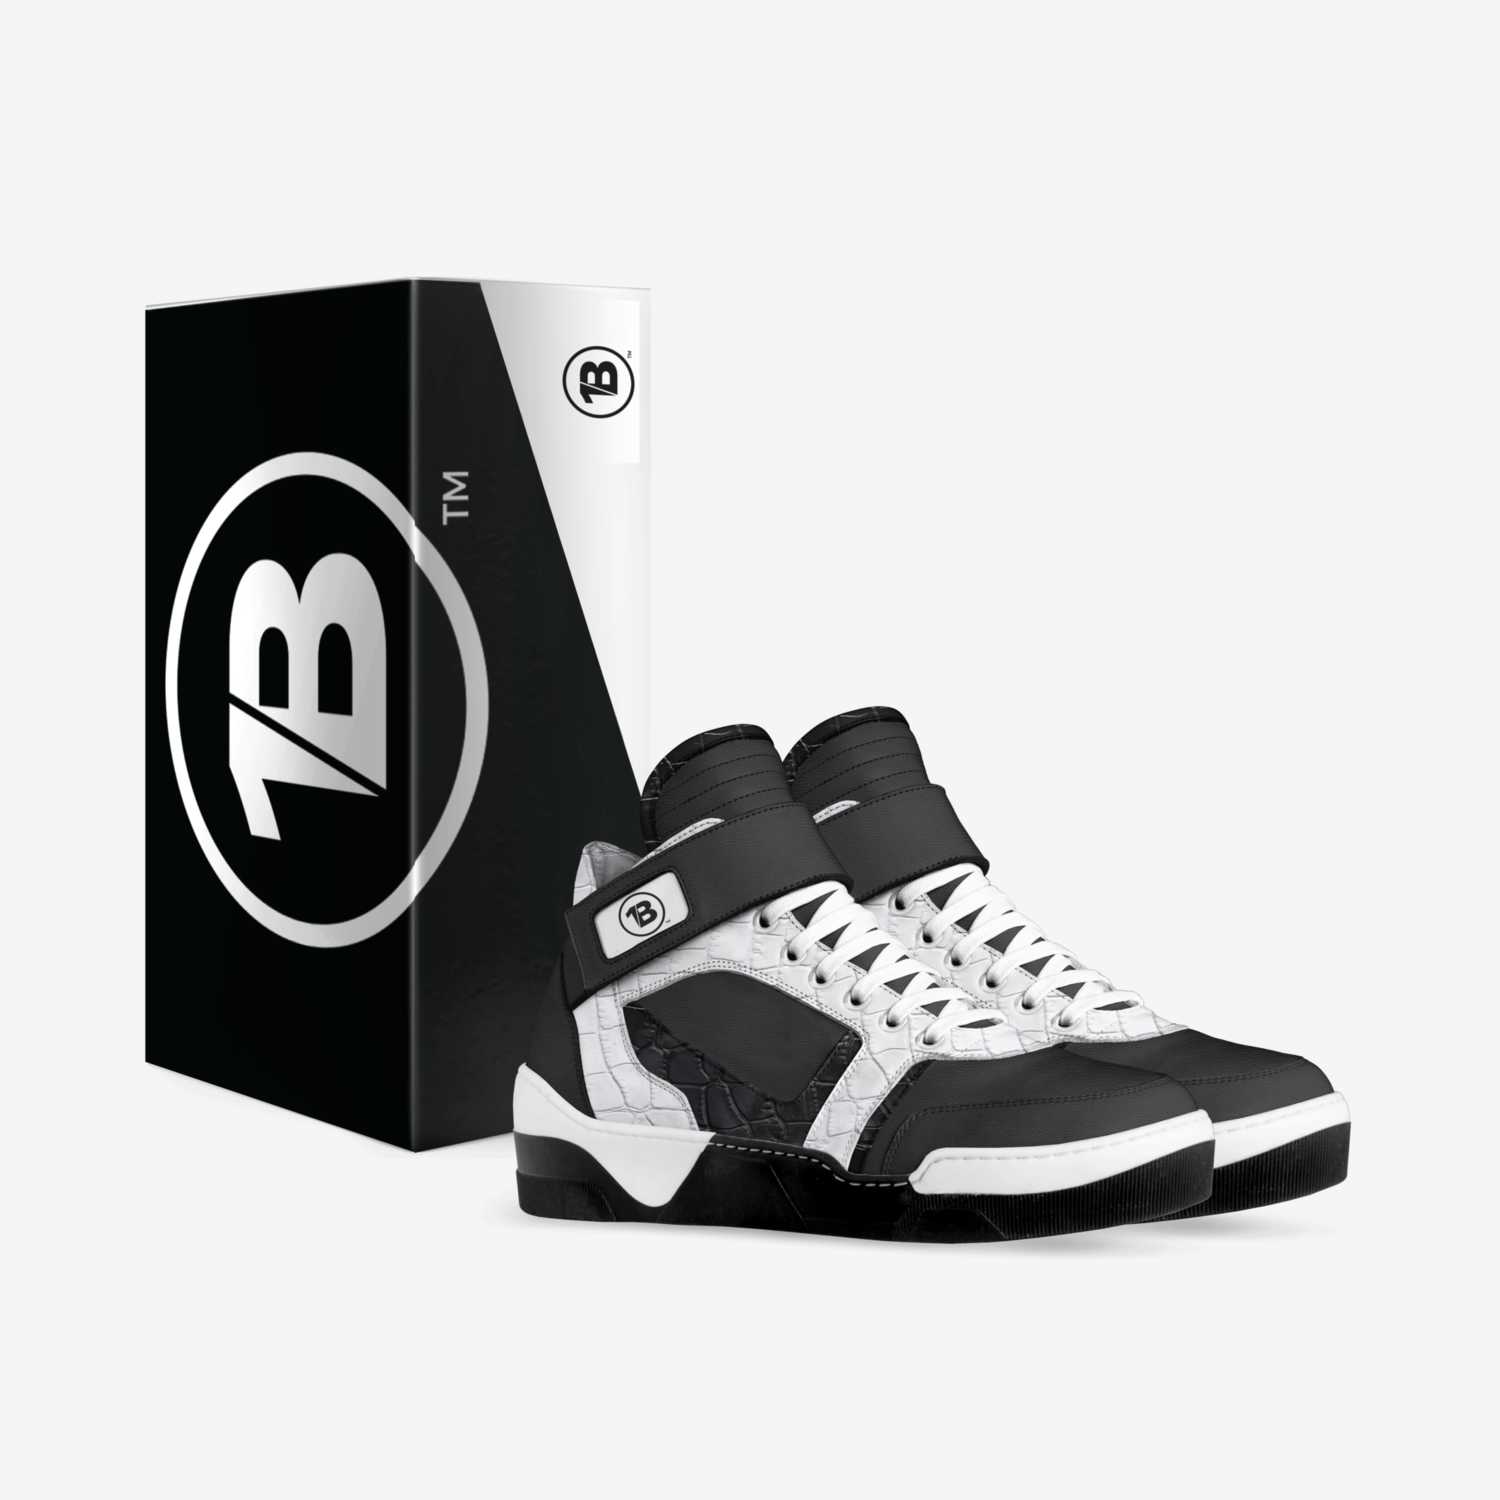 OneBand Hightop custom made in Italy shoes by One Band, Llc | Box view